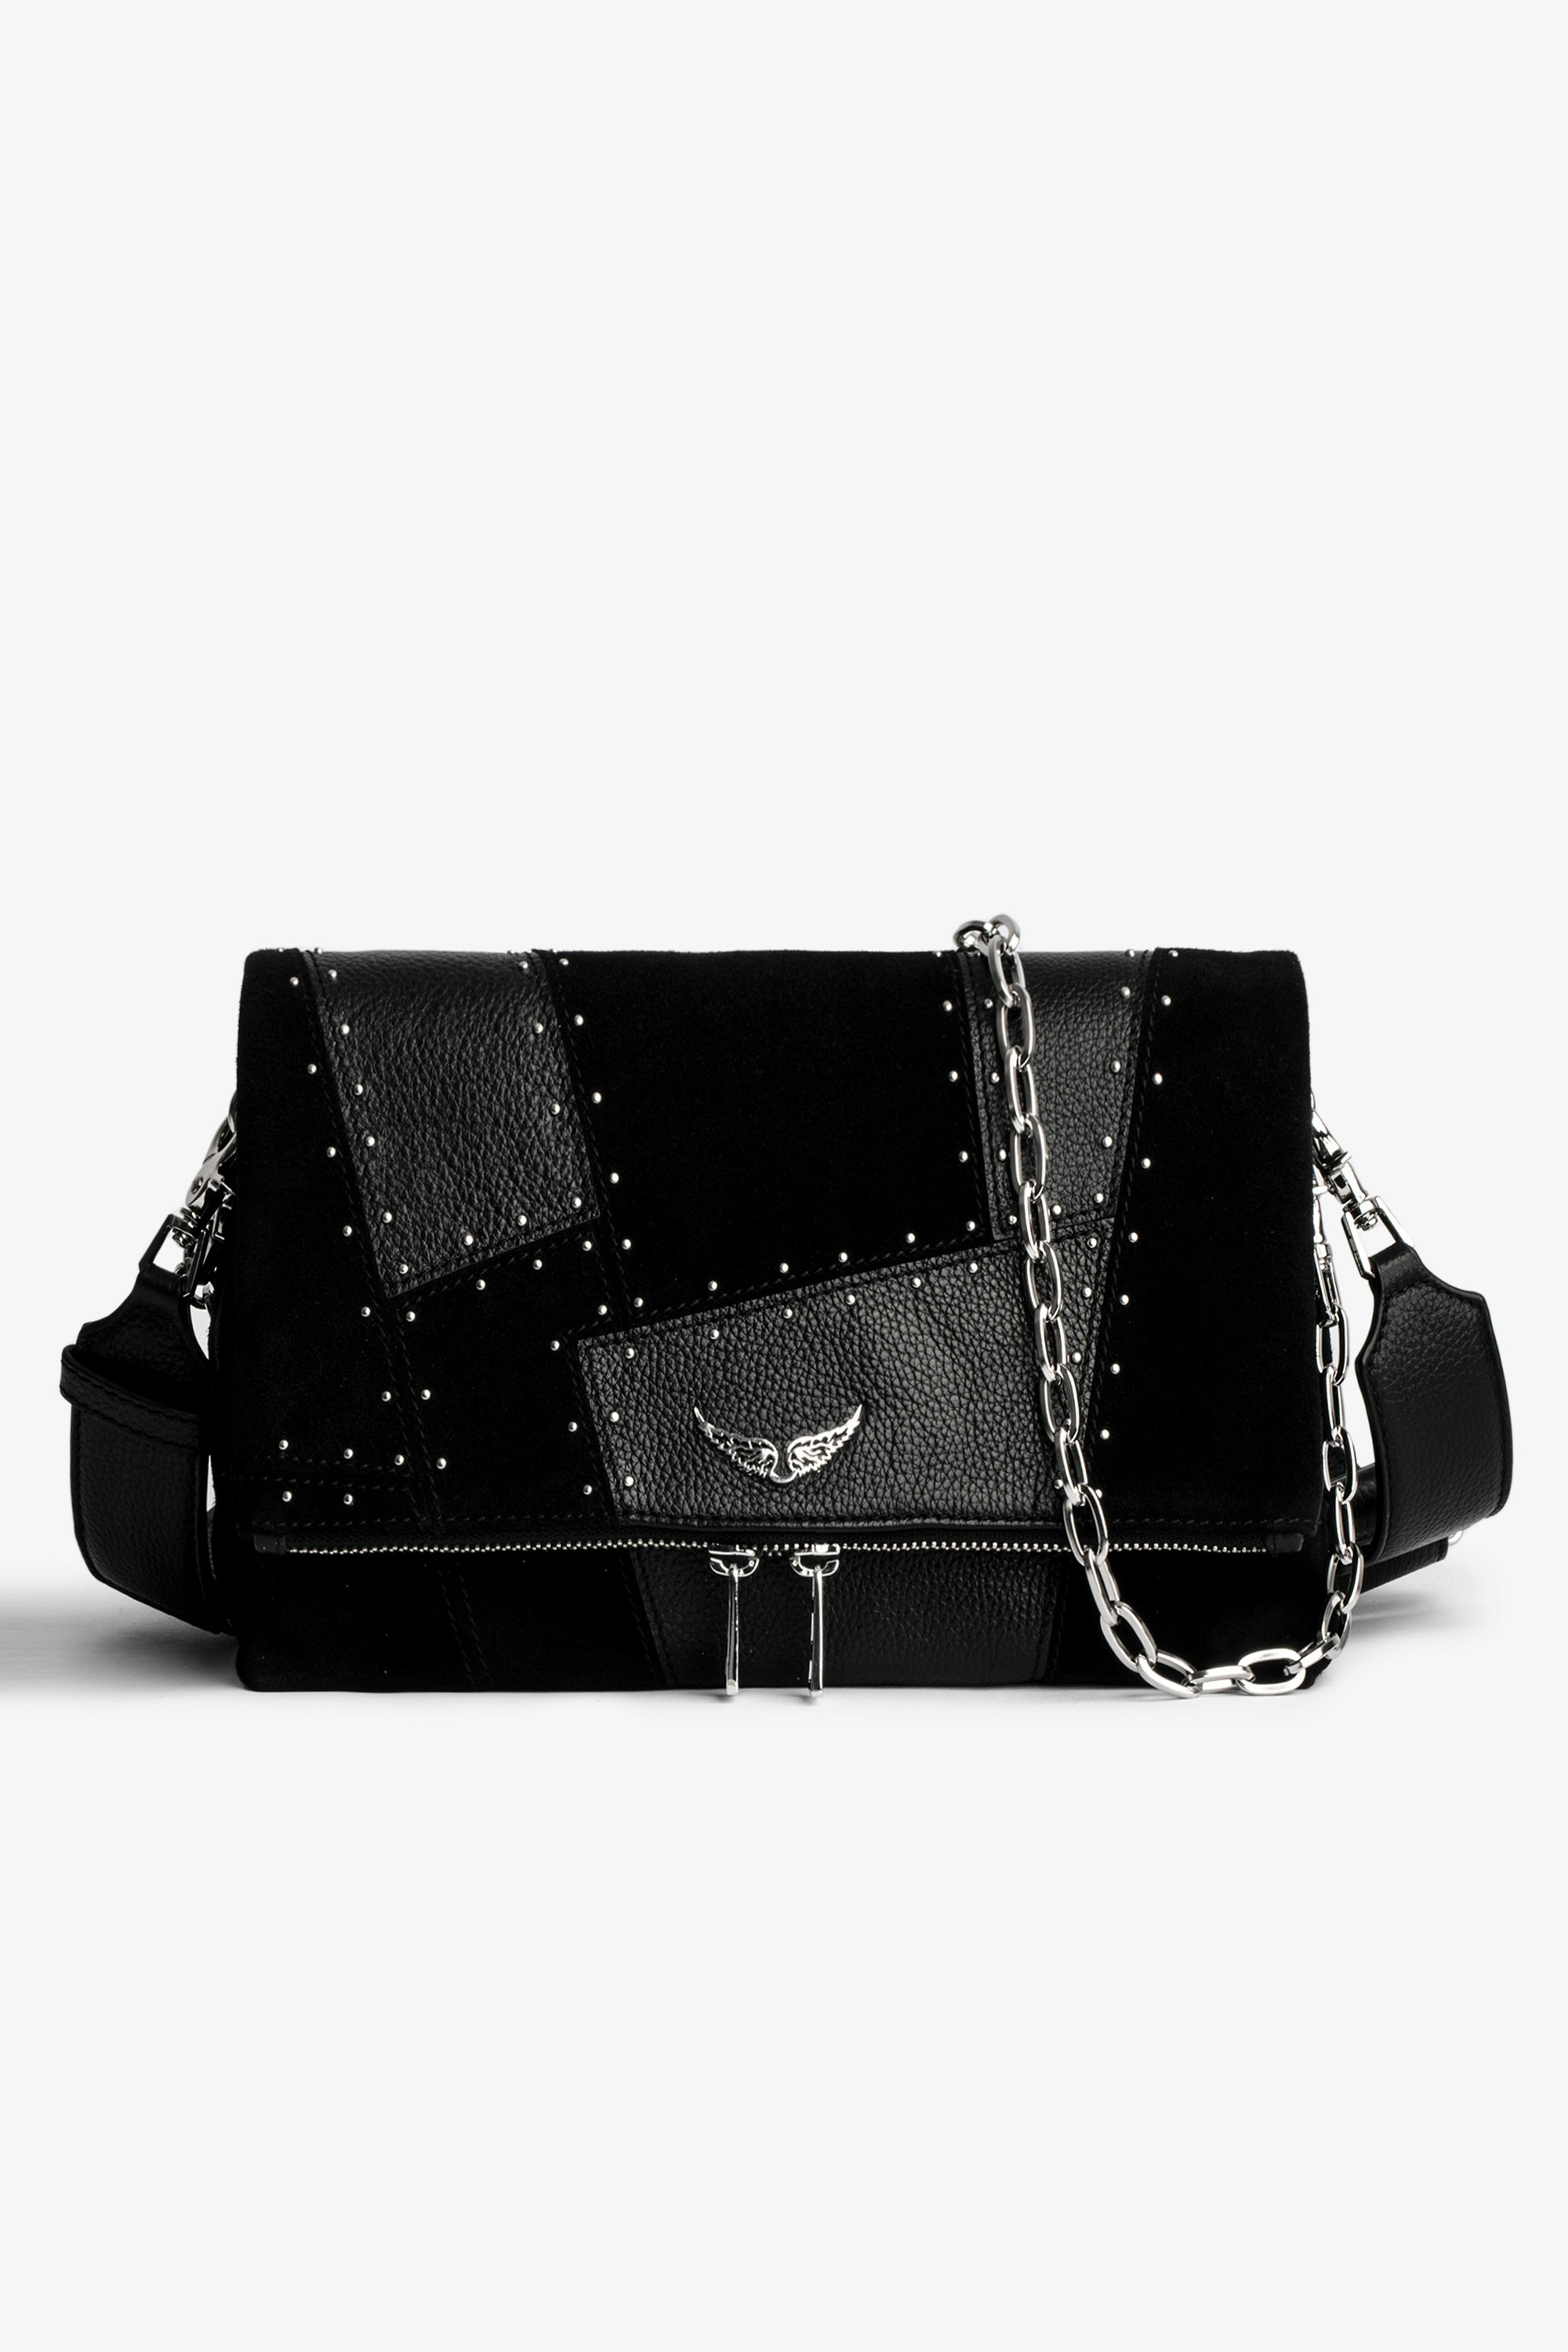 Rocky Patchwork Studs バッグ Women’s shoulder bag in black leather patchwork with silver-tone studs 